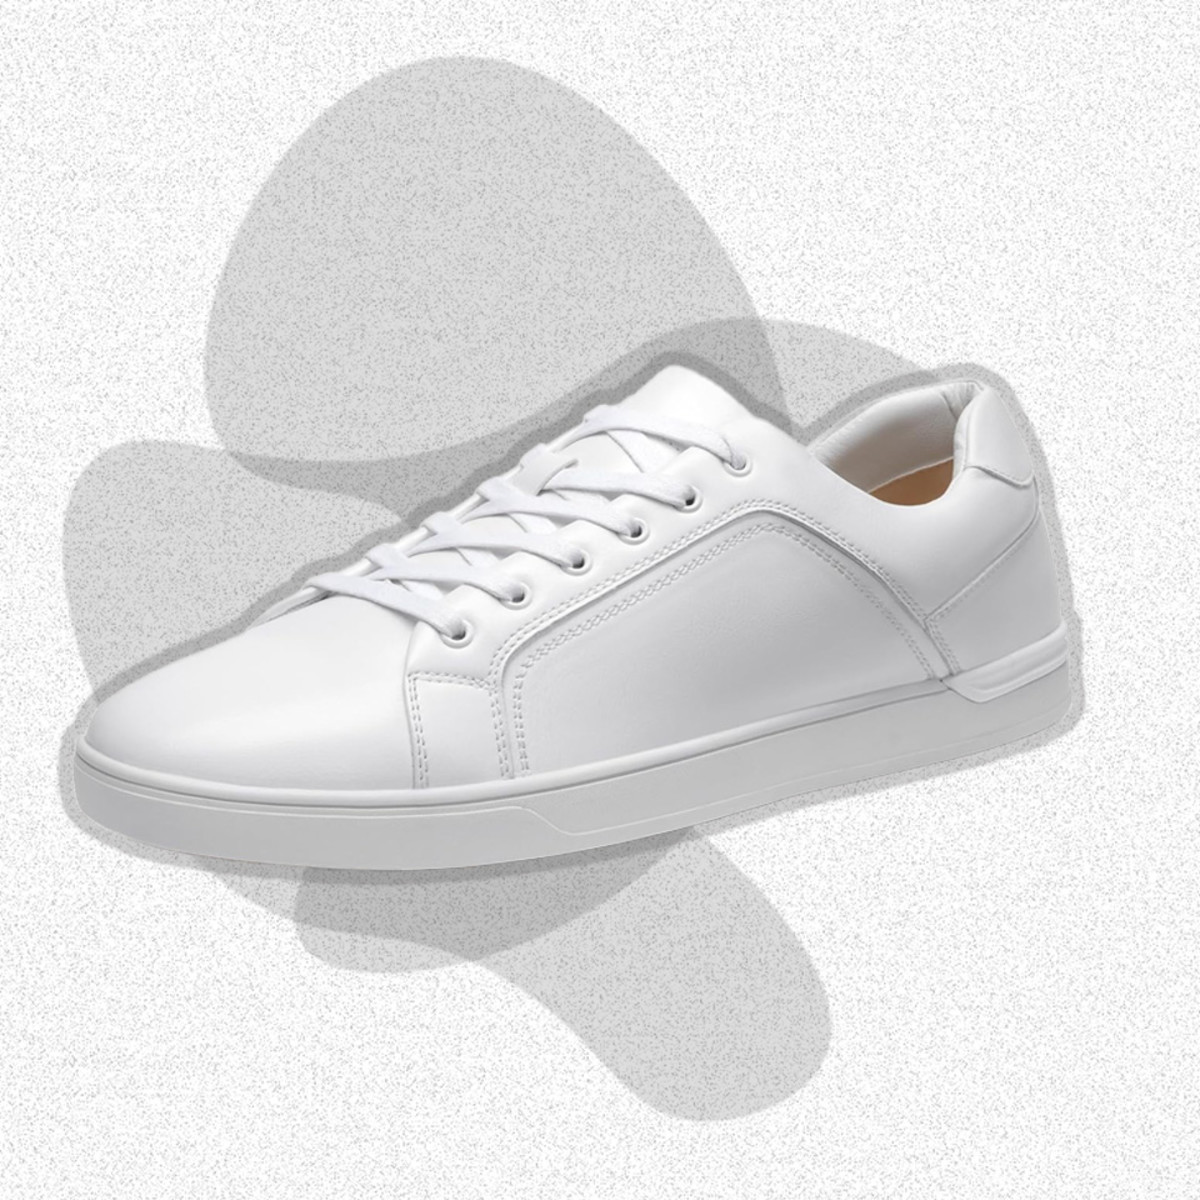 Mens Shoes for All White Attire Parties